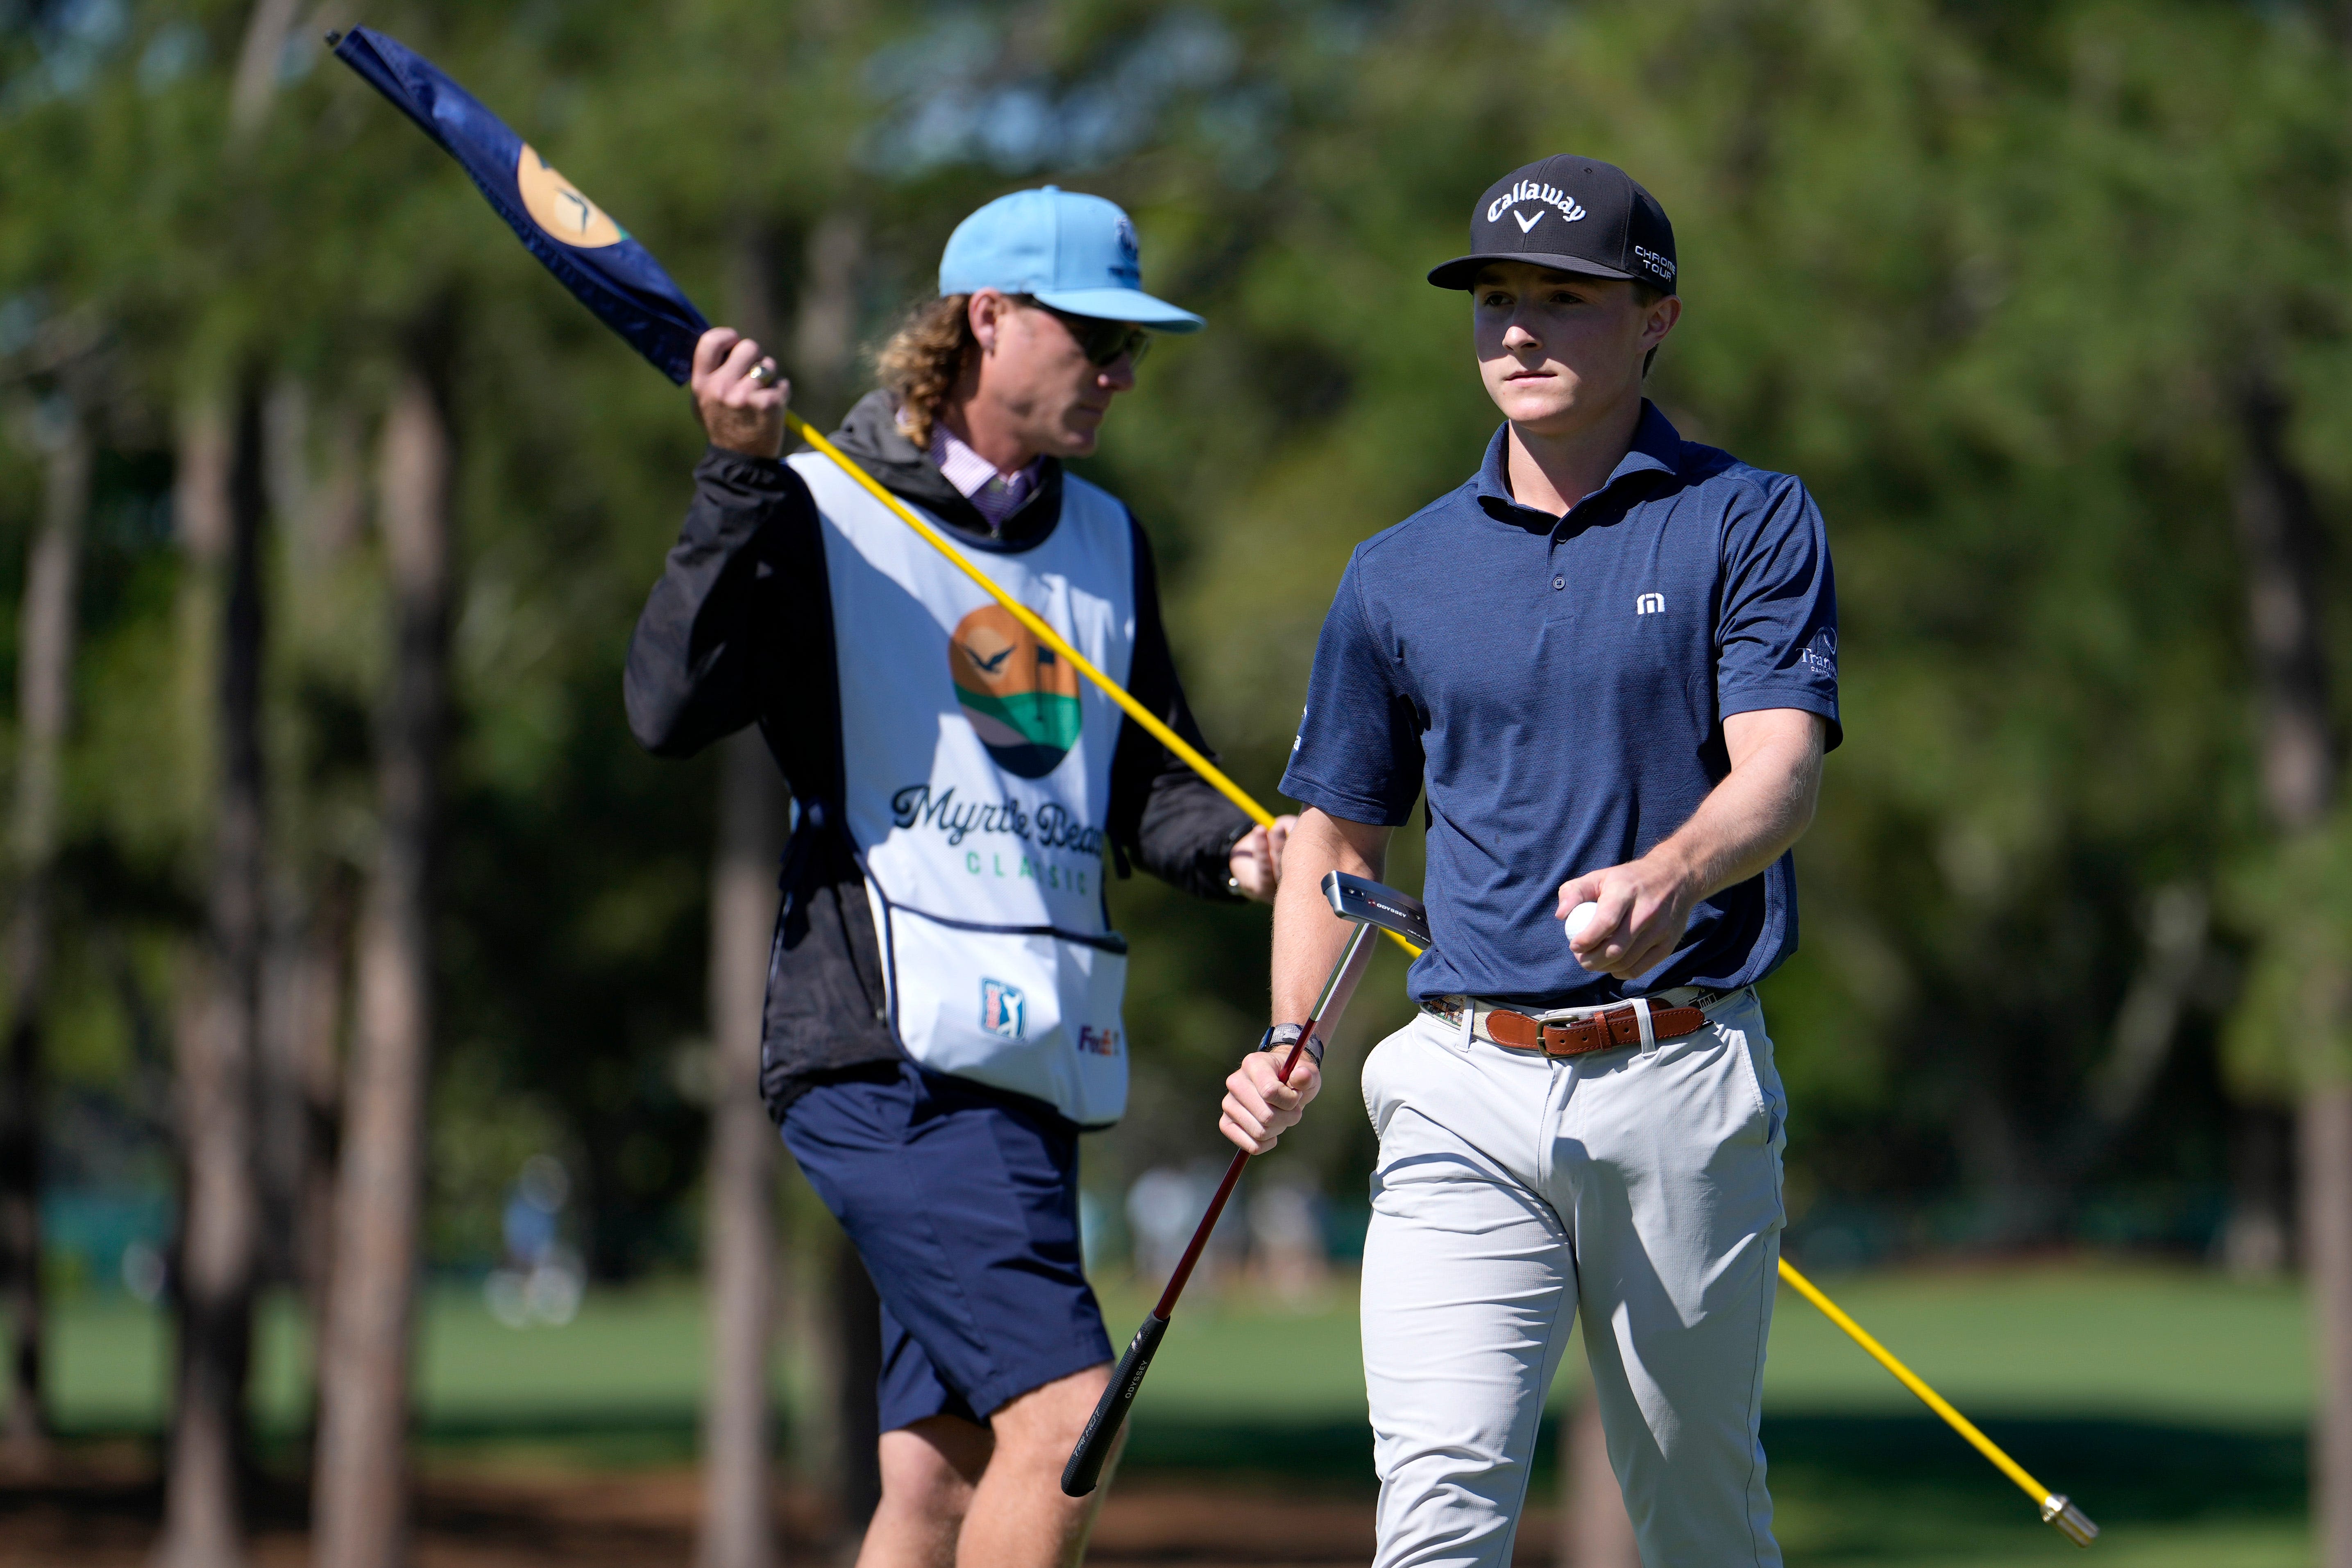 Blades Brown, 16, shoots 66, moves up Myrtle Beach Classic leaderboard in PGA Tour debut